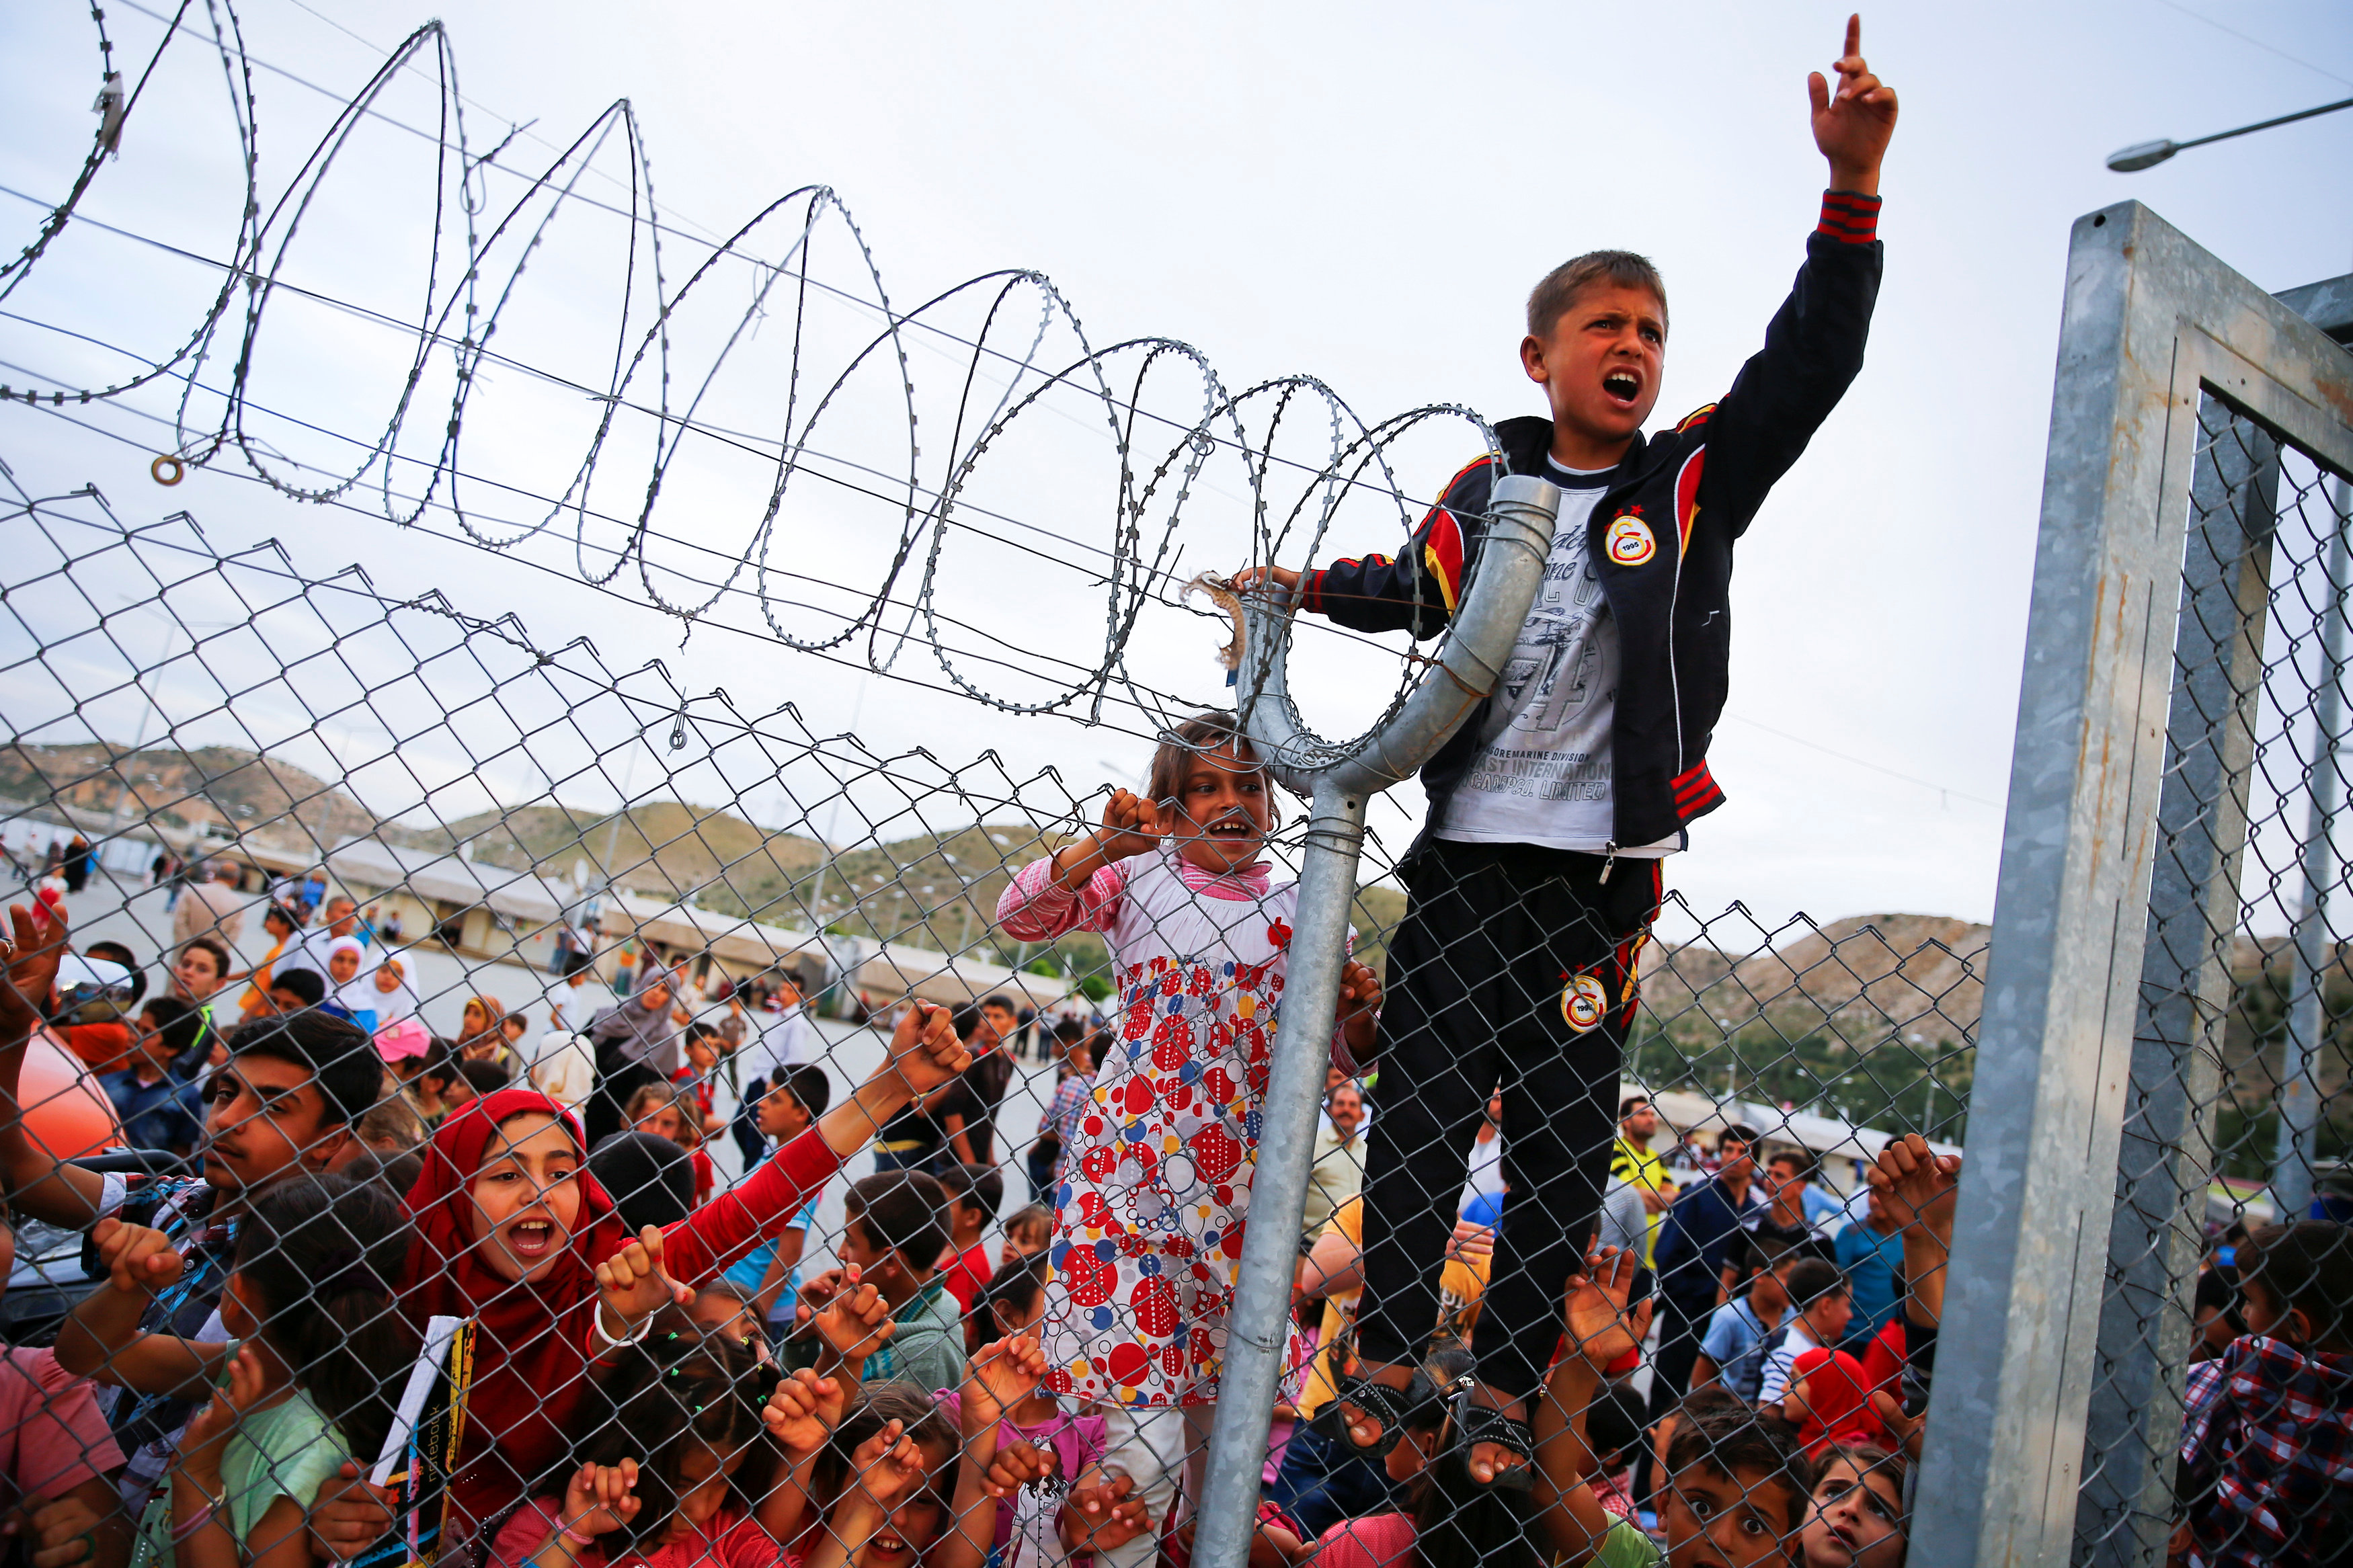 Refugee youths gesture from behind a fence as German Chancellor Angela Merkel, Turkish Prime Minister Ahmet Davutoglu, EU Council President Donald Tusk and European Commission Vice-President Frans Timmermans (all not pictured) arrive at Nizip refugee camp